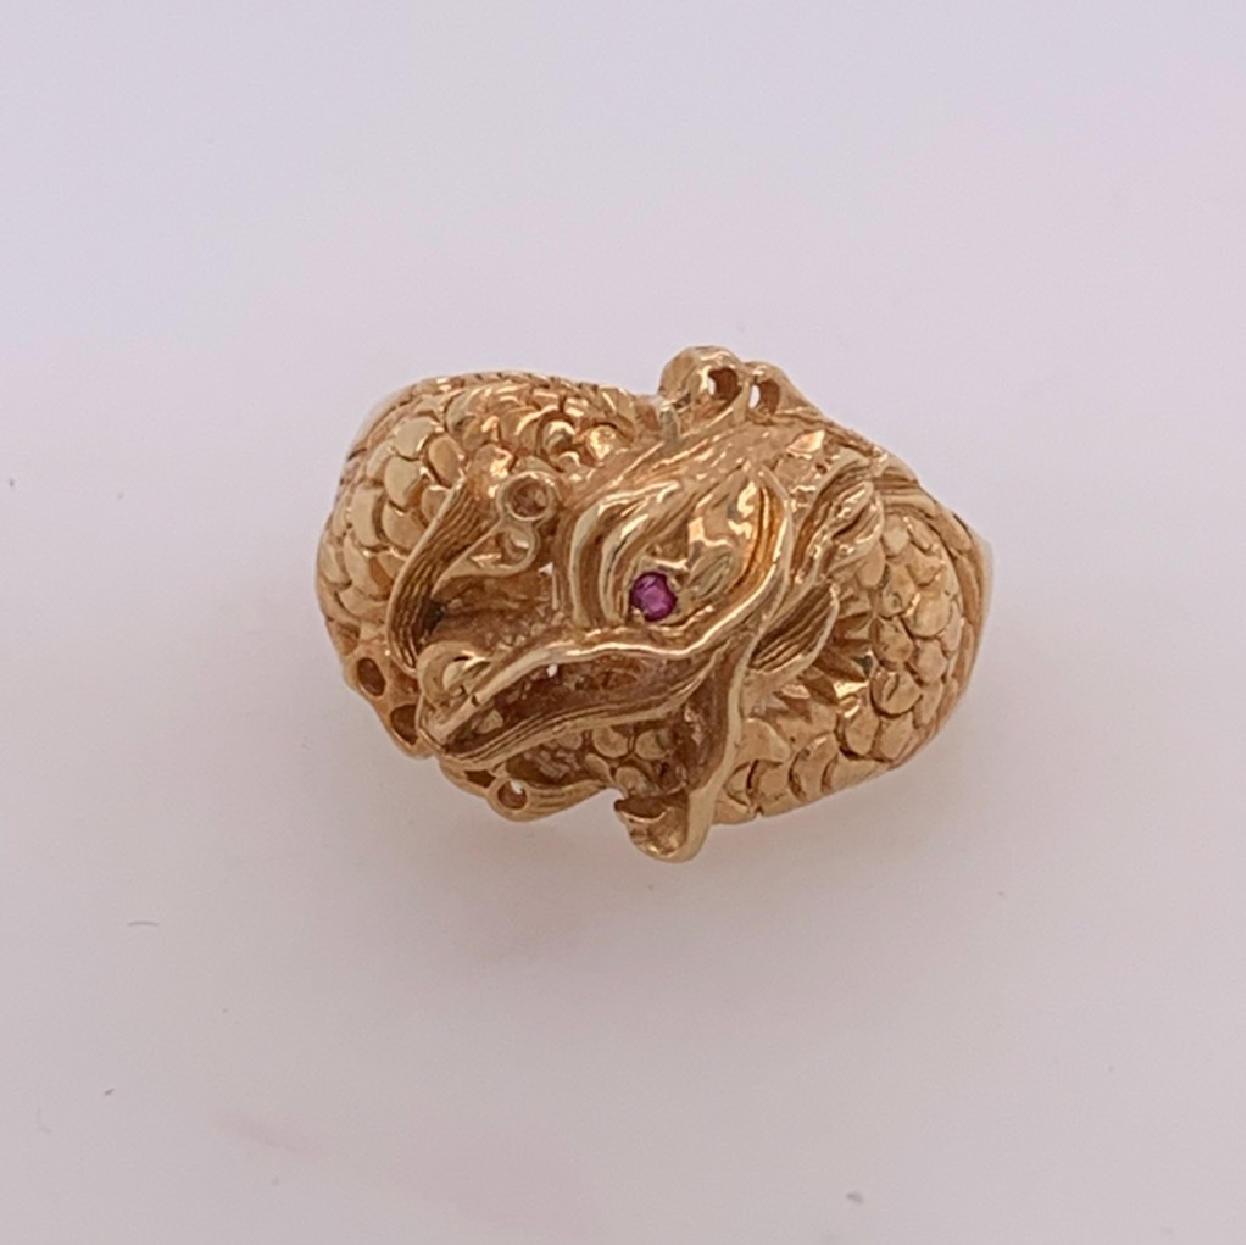 14K Yellow Gold Dragon Ring with Ruby Eye

Size 11.75